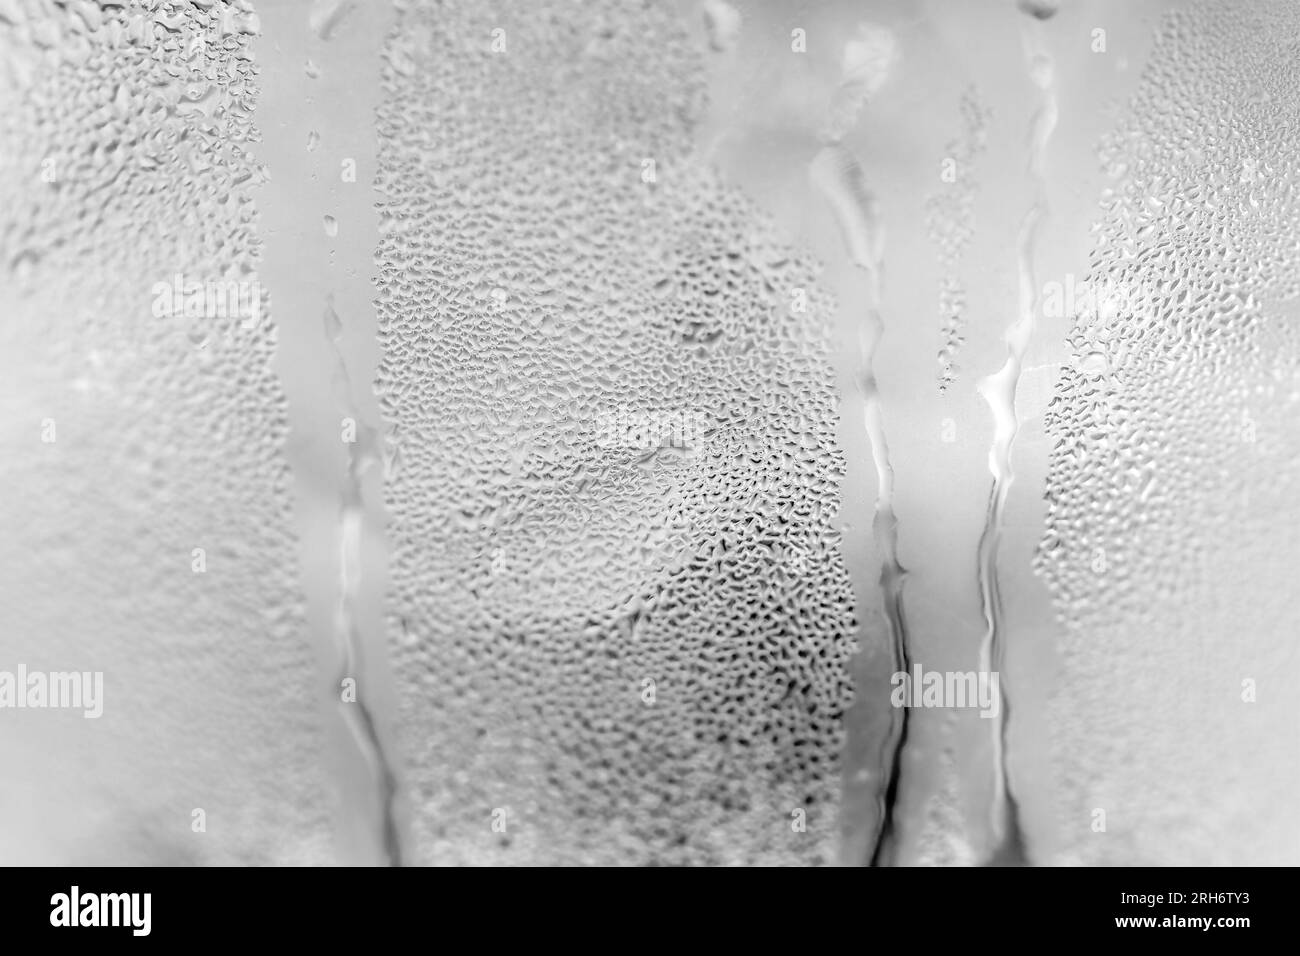 Ice cold glass, covered with water drops. Close-up Stock Photo